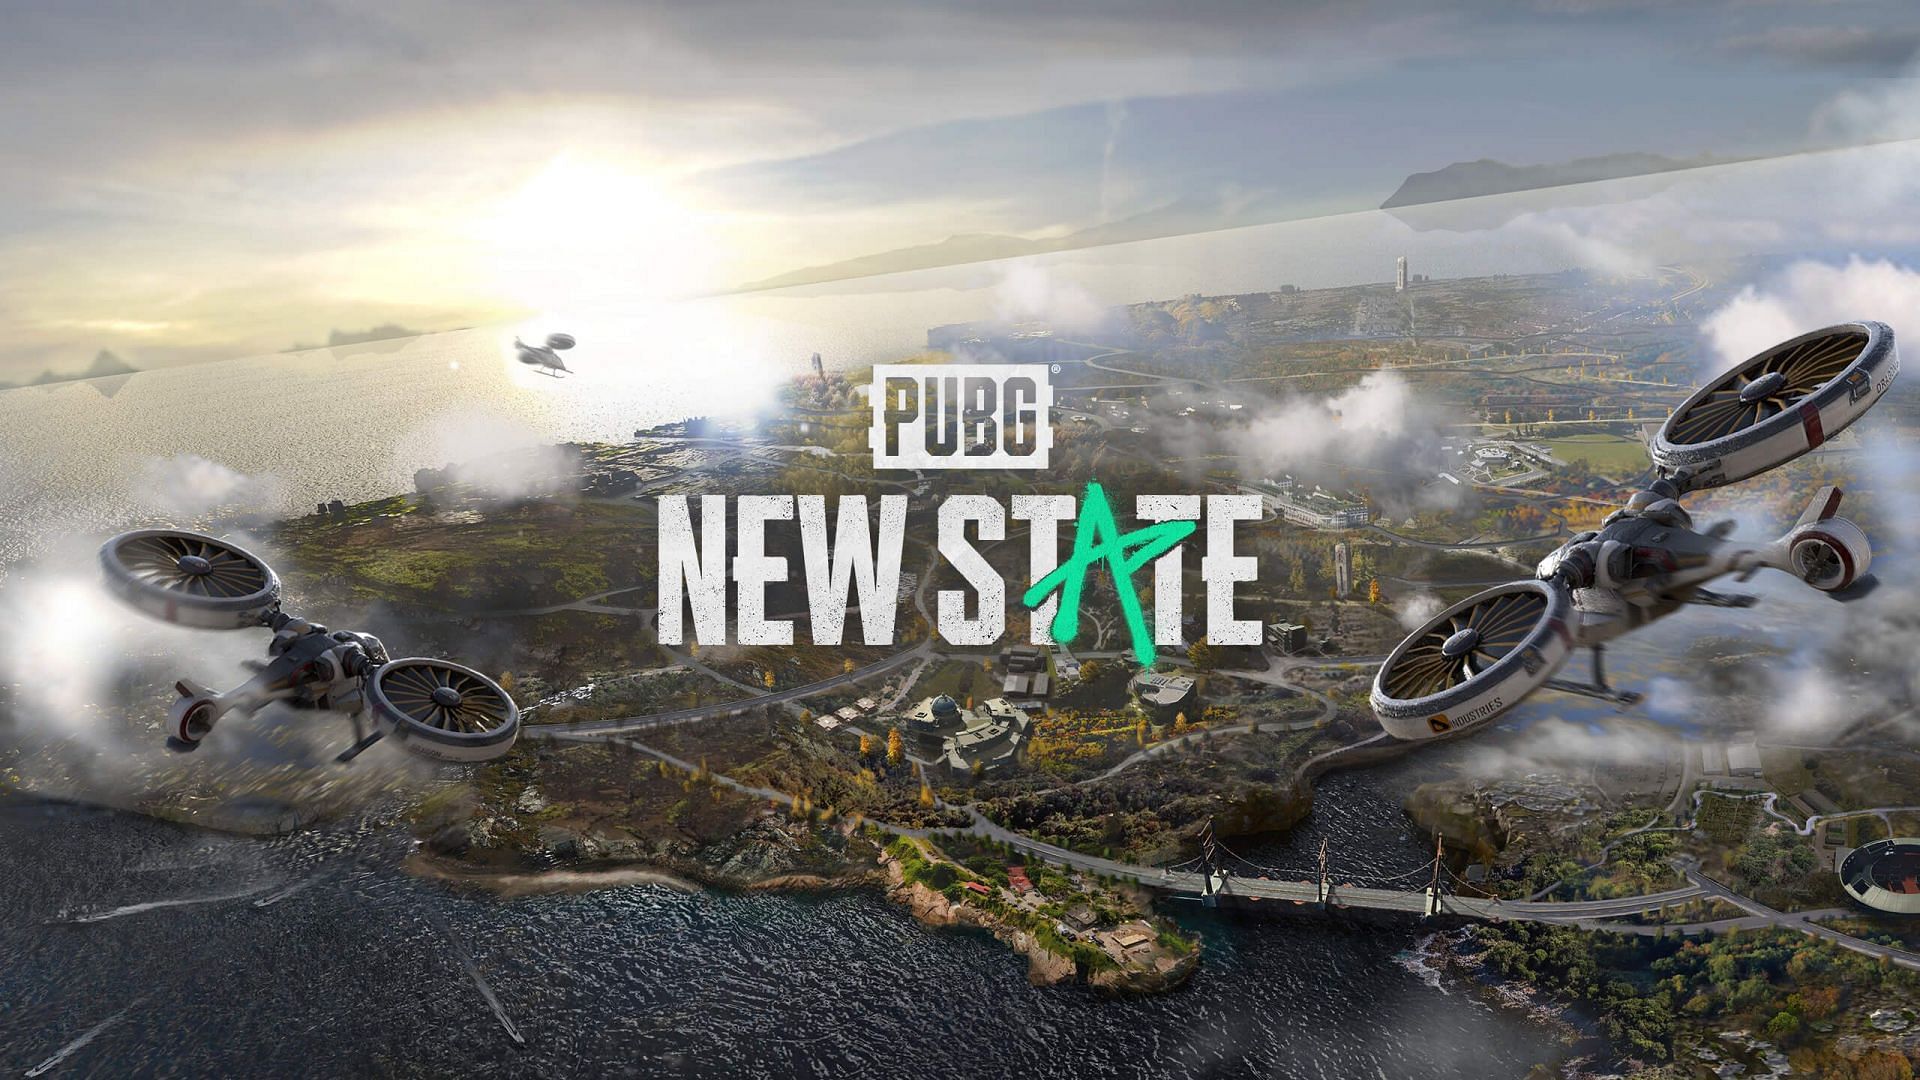 PUBG New State ratings go down as players complain about poor graphics and lag (Image via Krafton)